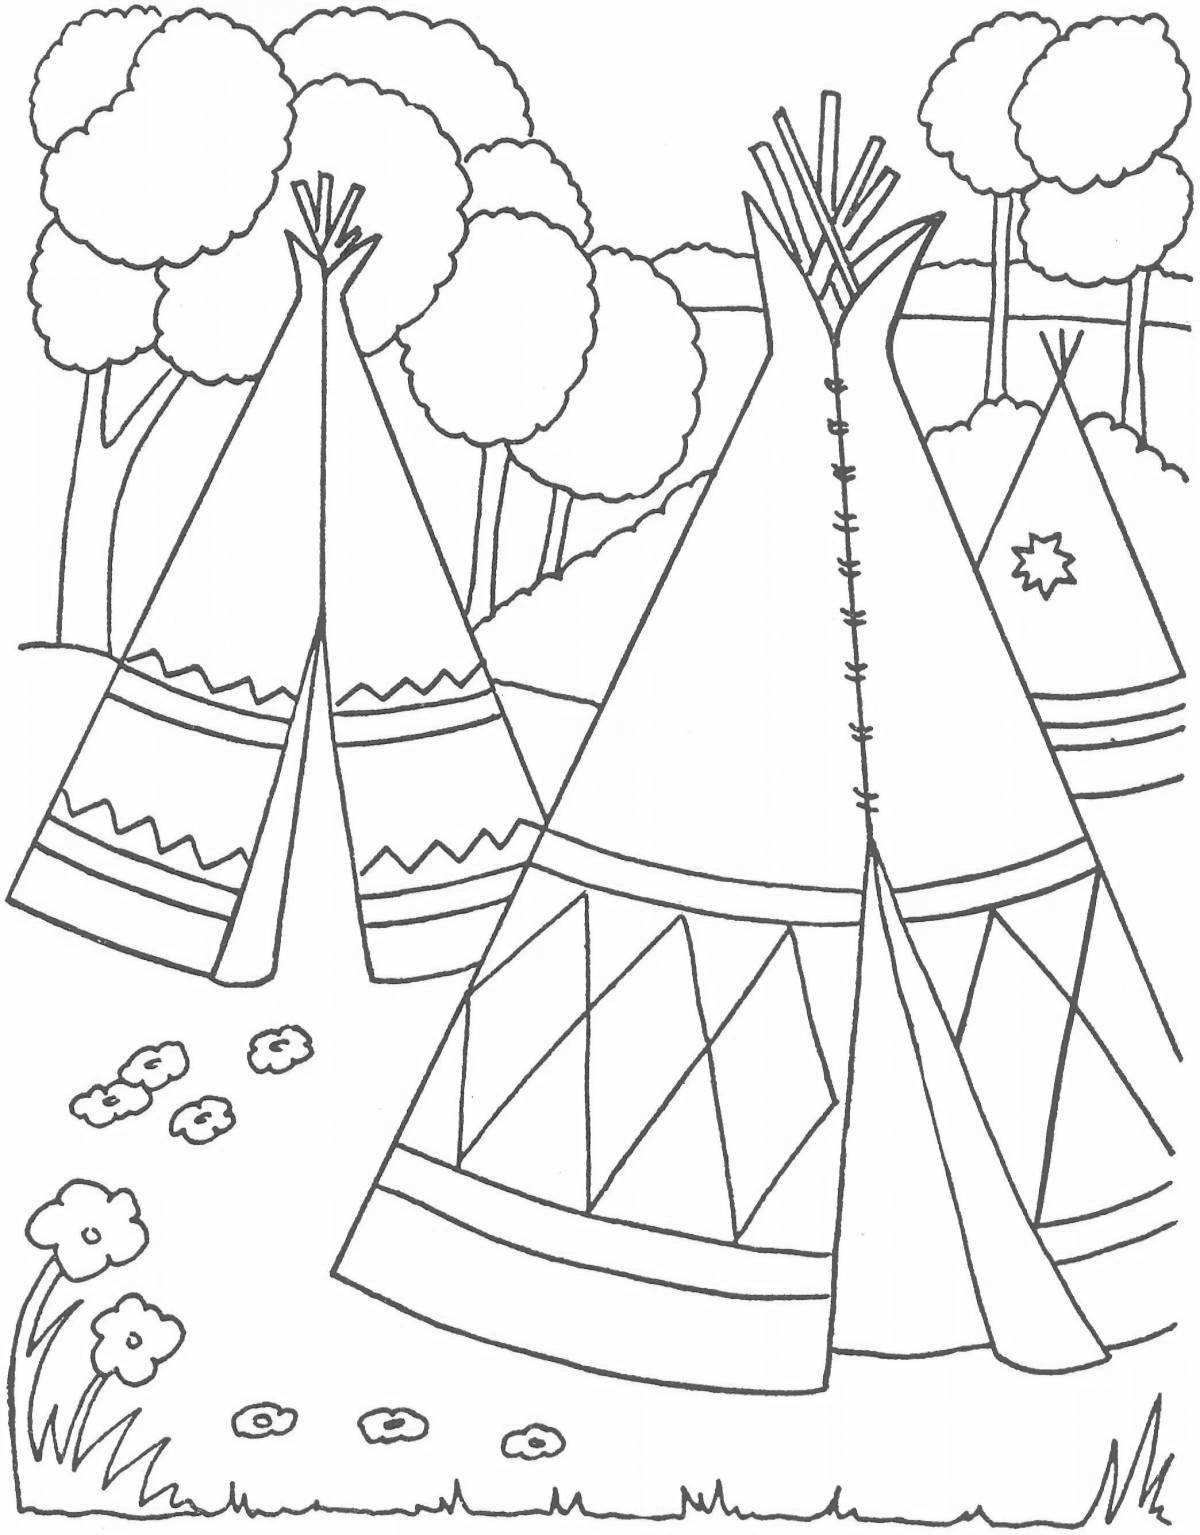 Color-frenzy coloring page for children of the north